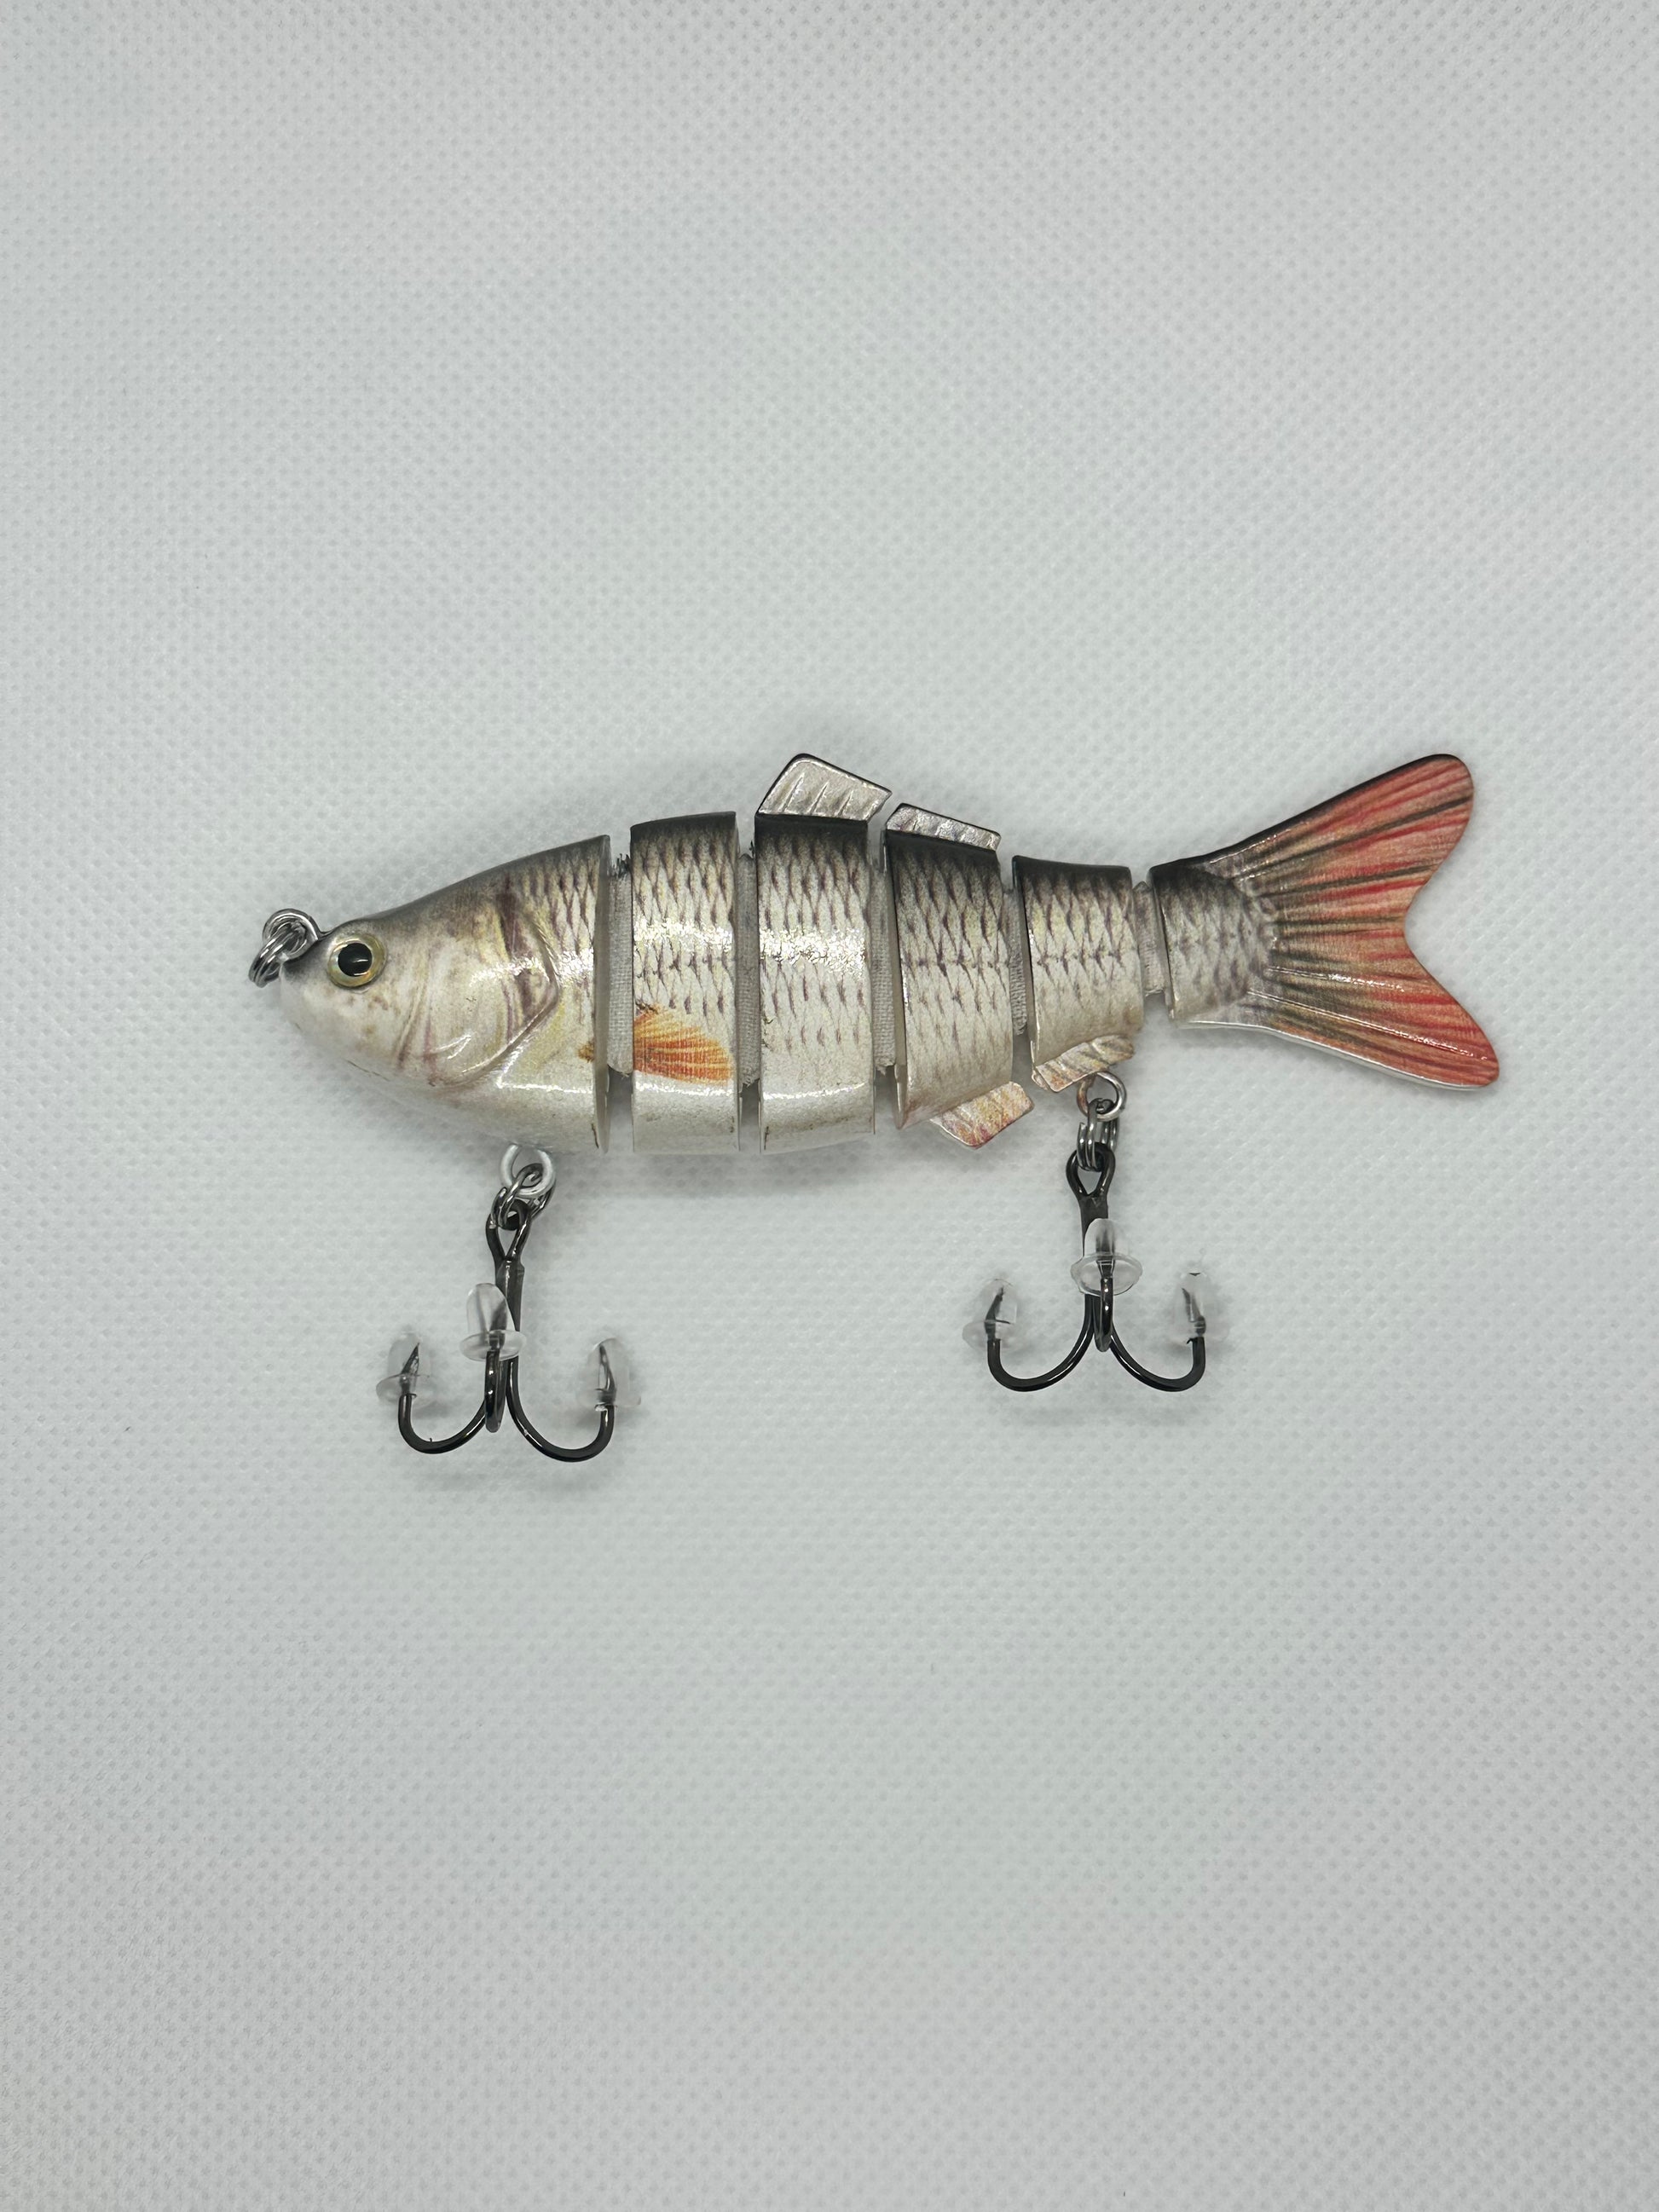 4 Jointed Minnow Fishing Lures Bass